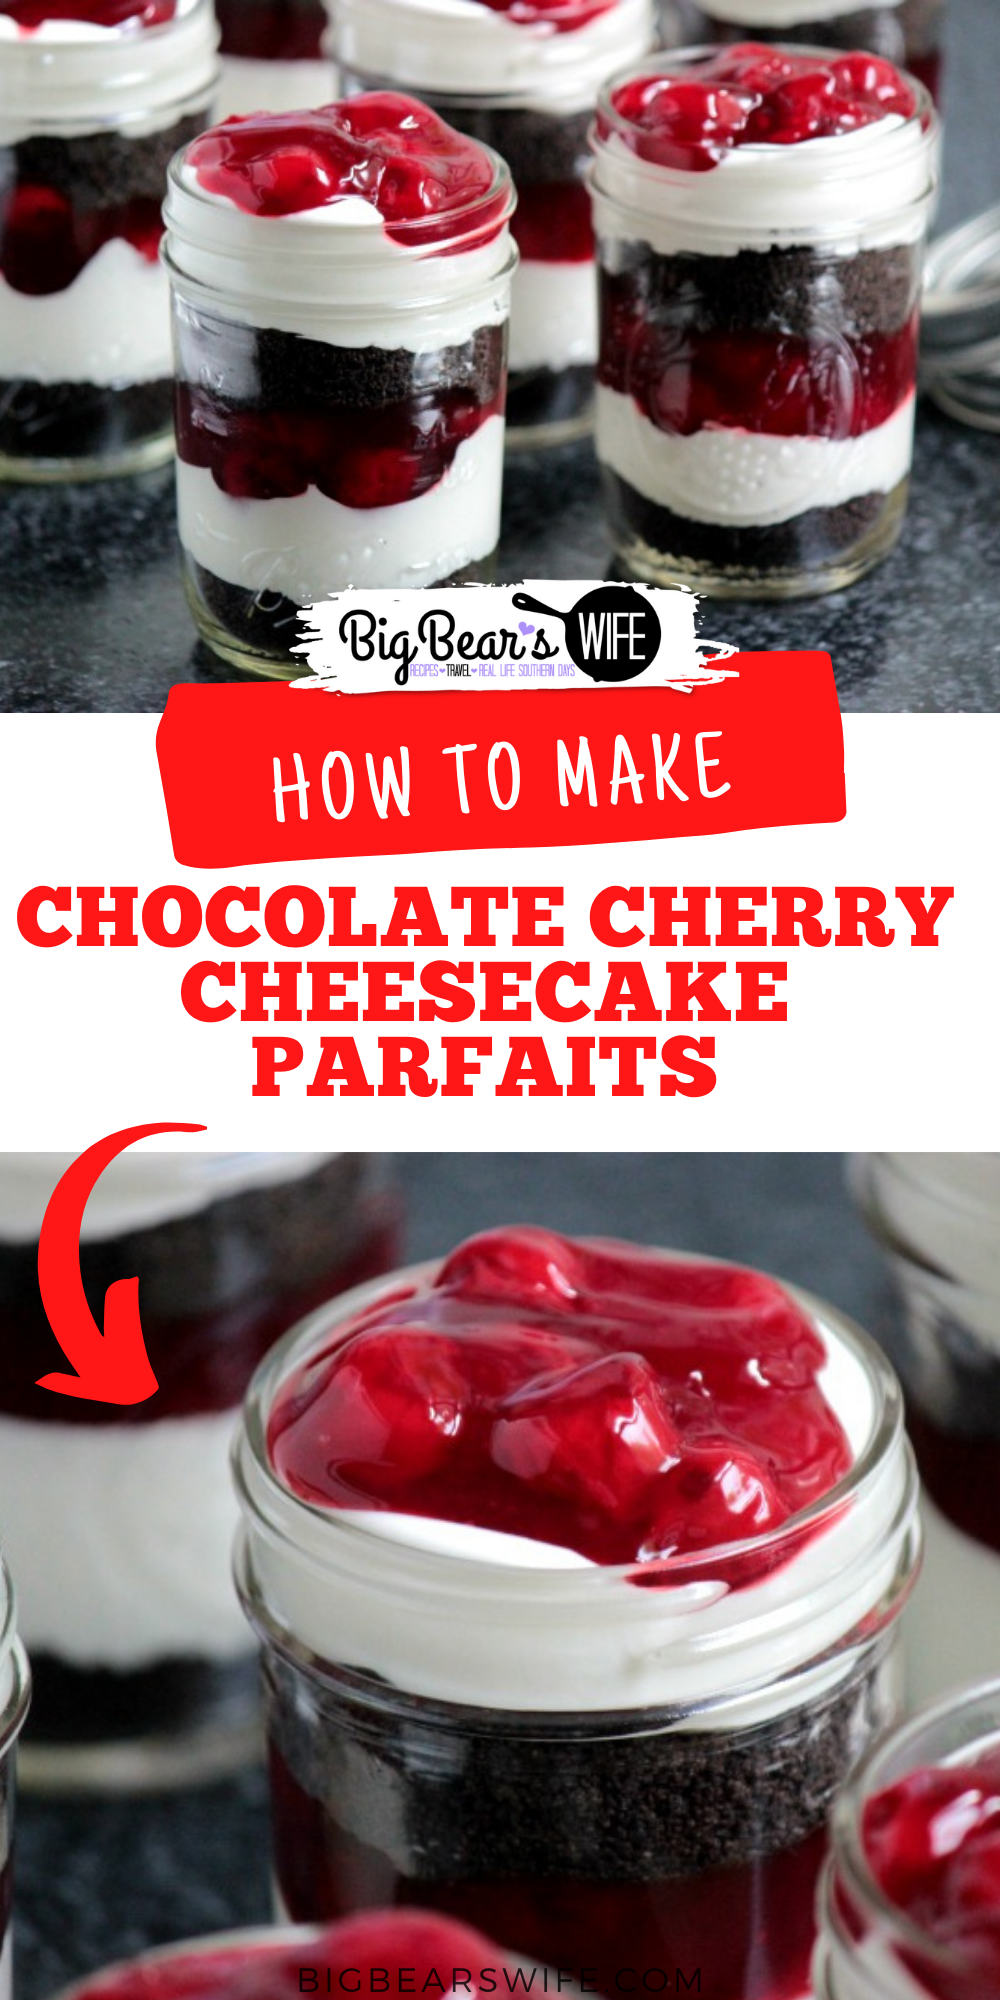 Layers of chocolate cookies, cherry pie filling and no bake cheesecake filling make up these super easy Chocolate Cherry Cheesecake Parfaits for dessert!  via @bigbearswife